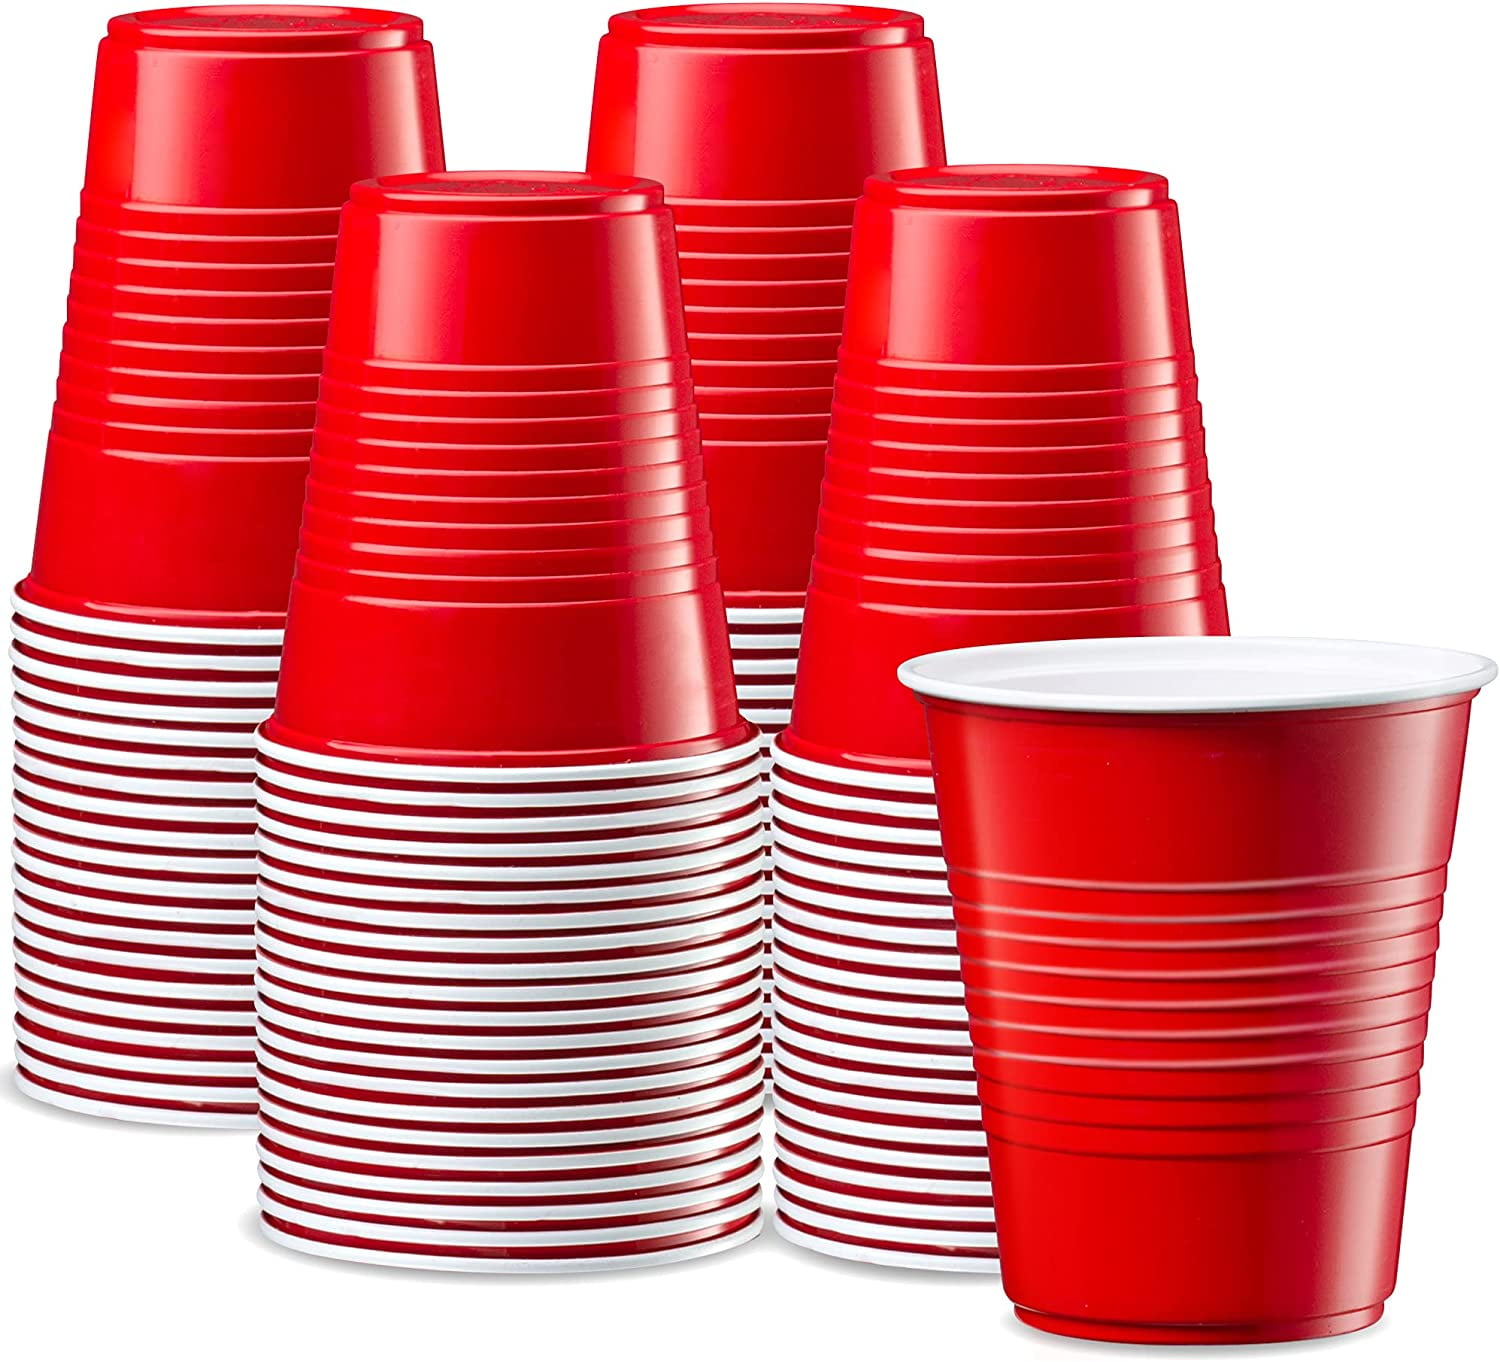 Comfy Package 12 Oz Plastic Cups for Party Disposable Cups, Red 40-Pack